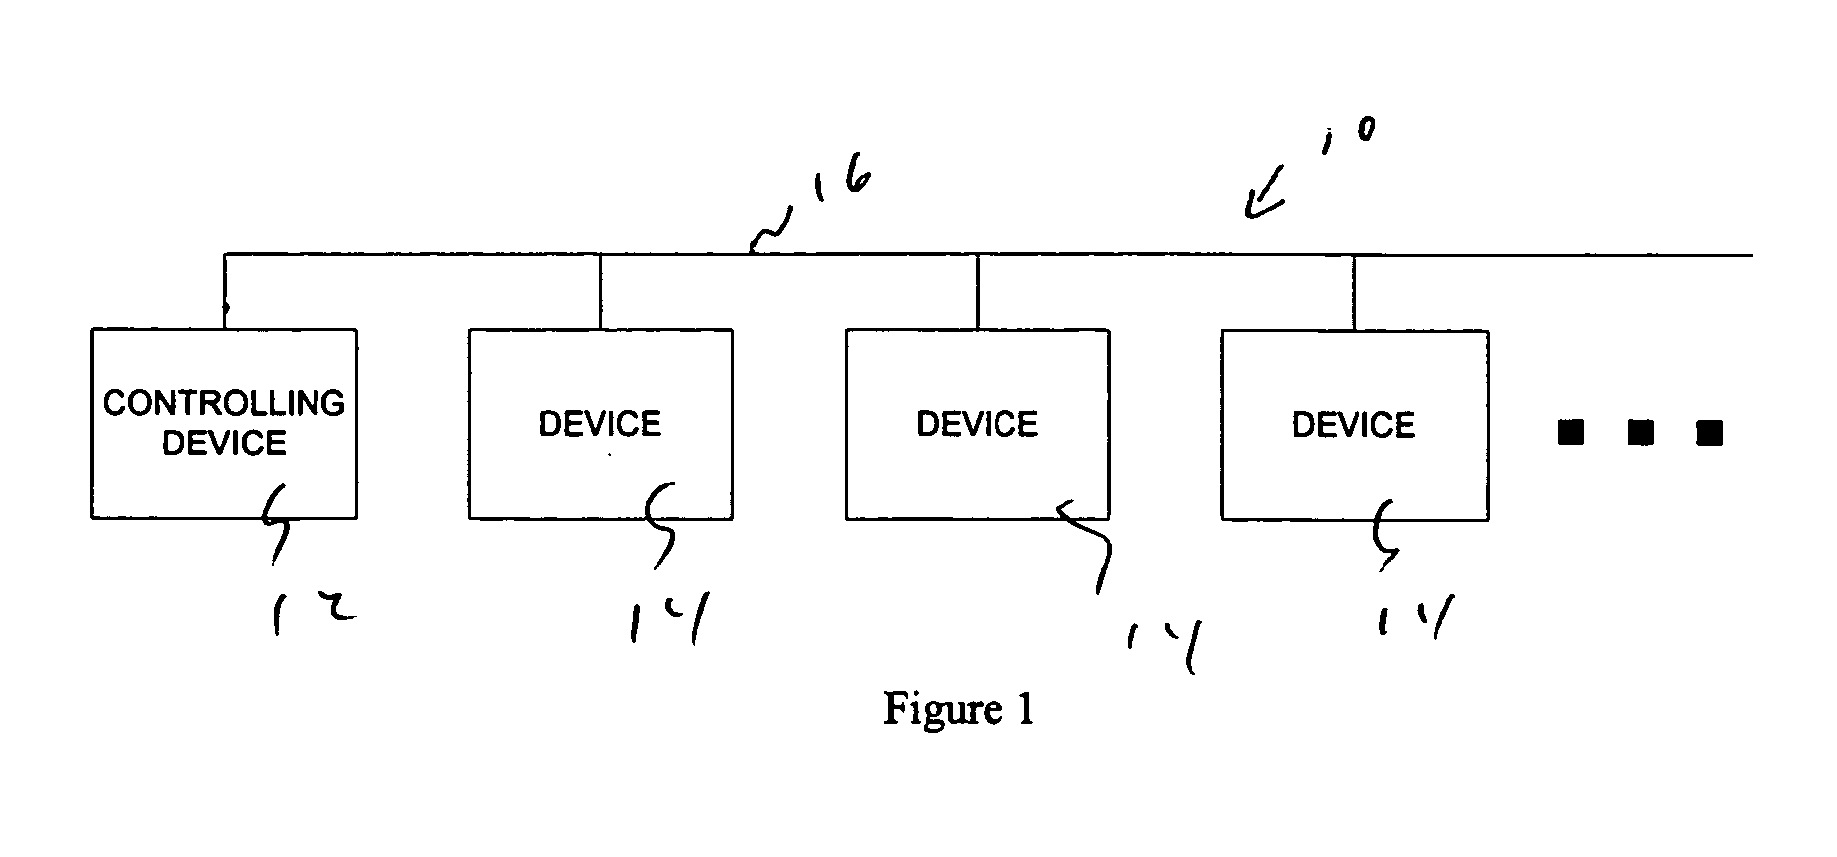 Adaptive algorithm for locating network devices in an ECP brake-equipped train